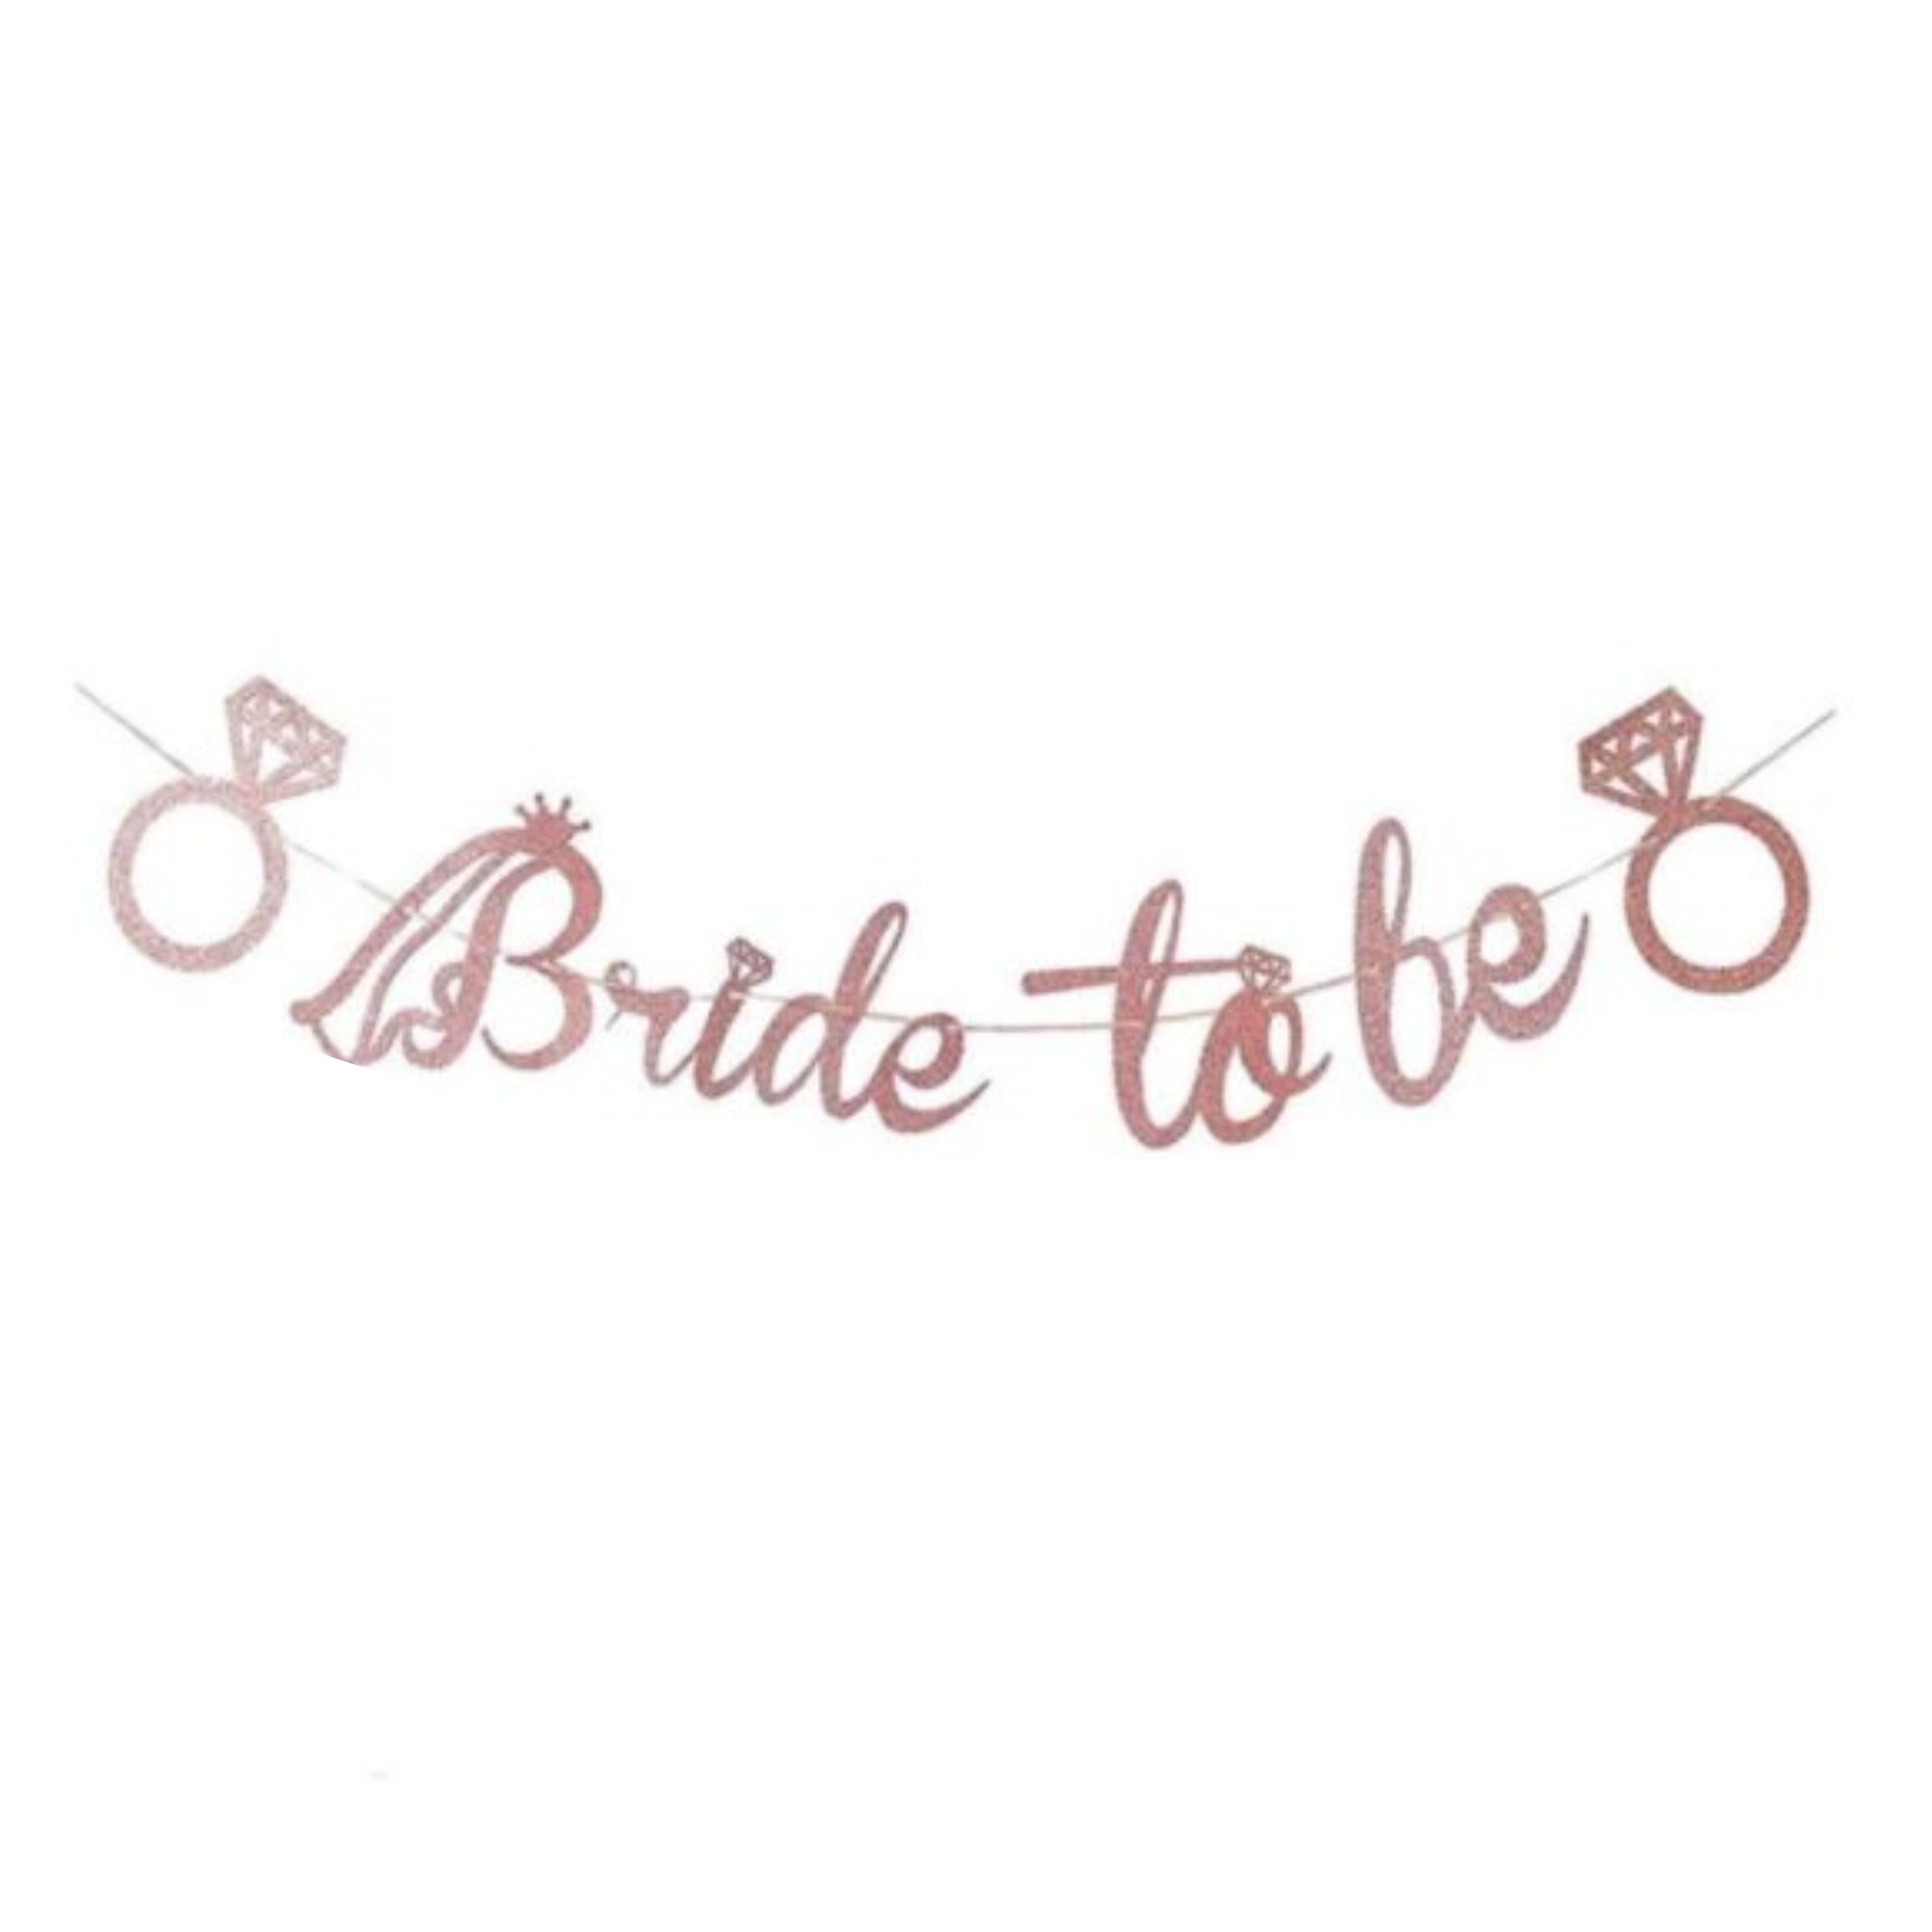 Bride To Be Theme Party Hanging Decorations Set